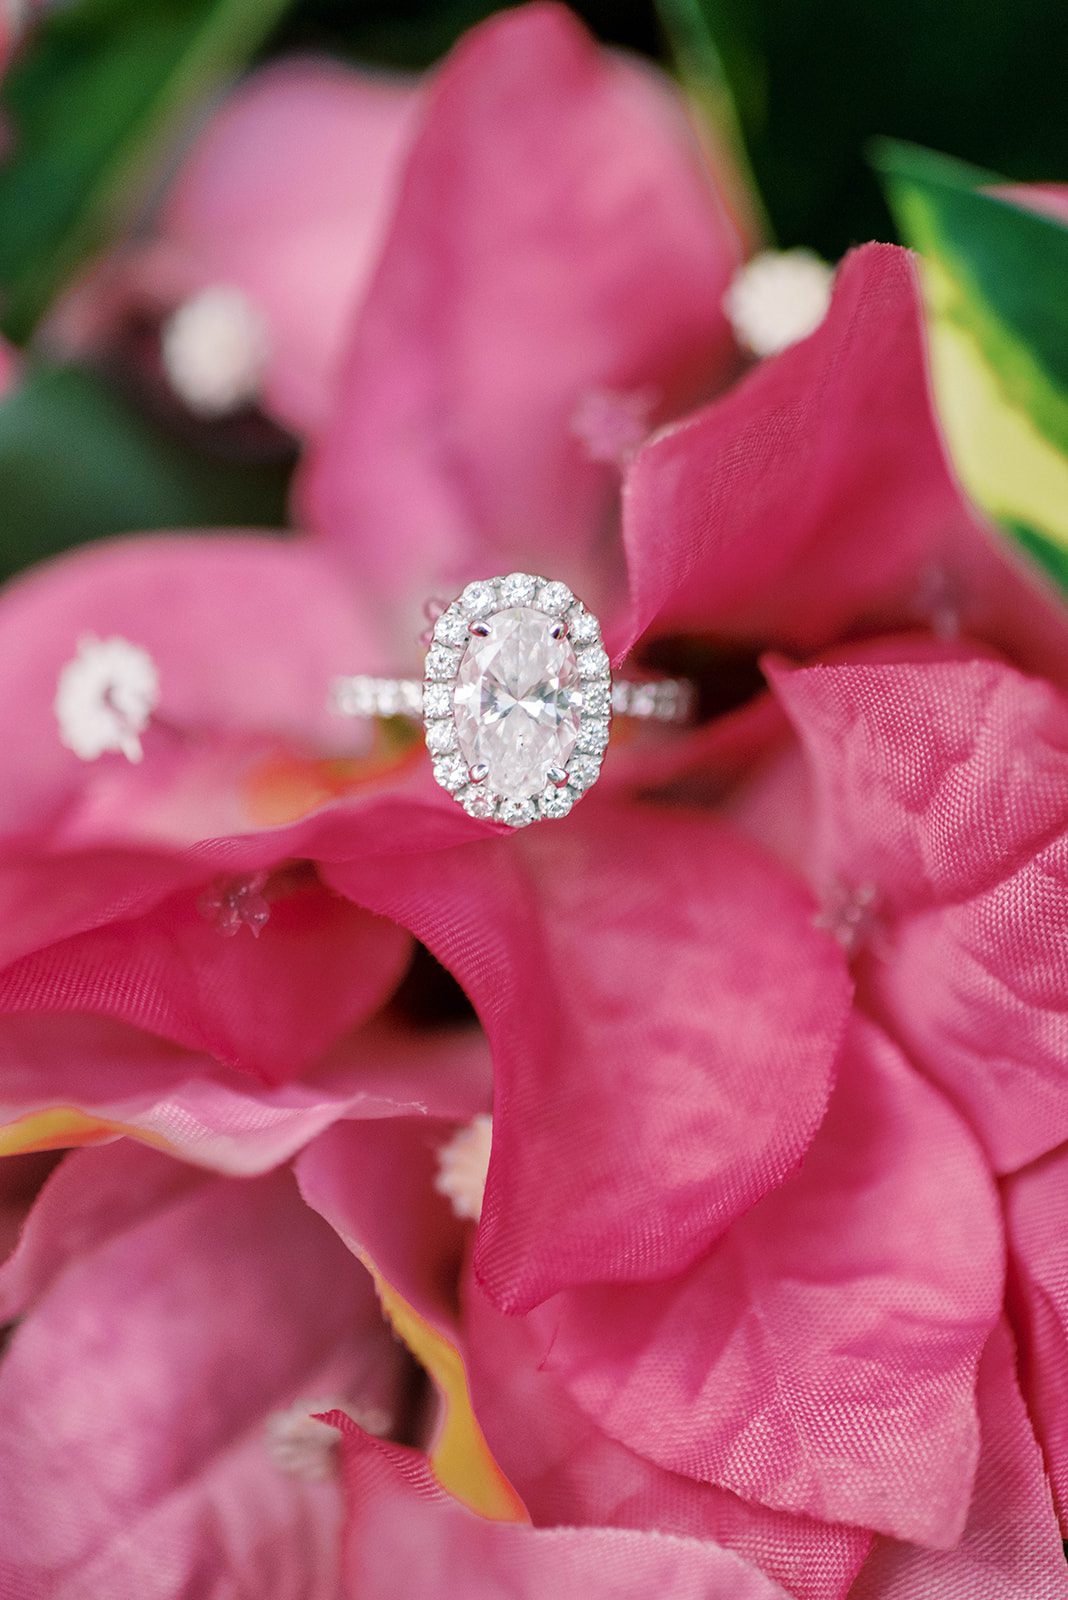 Top Reasons To Hire A Wedding Planner with gorgeous wedding ring with a large diamond surrounded by many small diamond sits on a bright pink flower